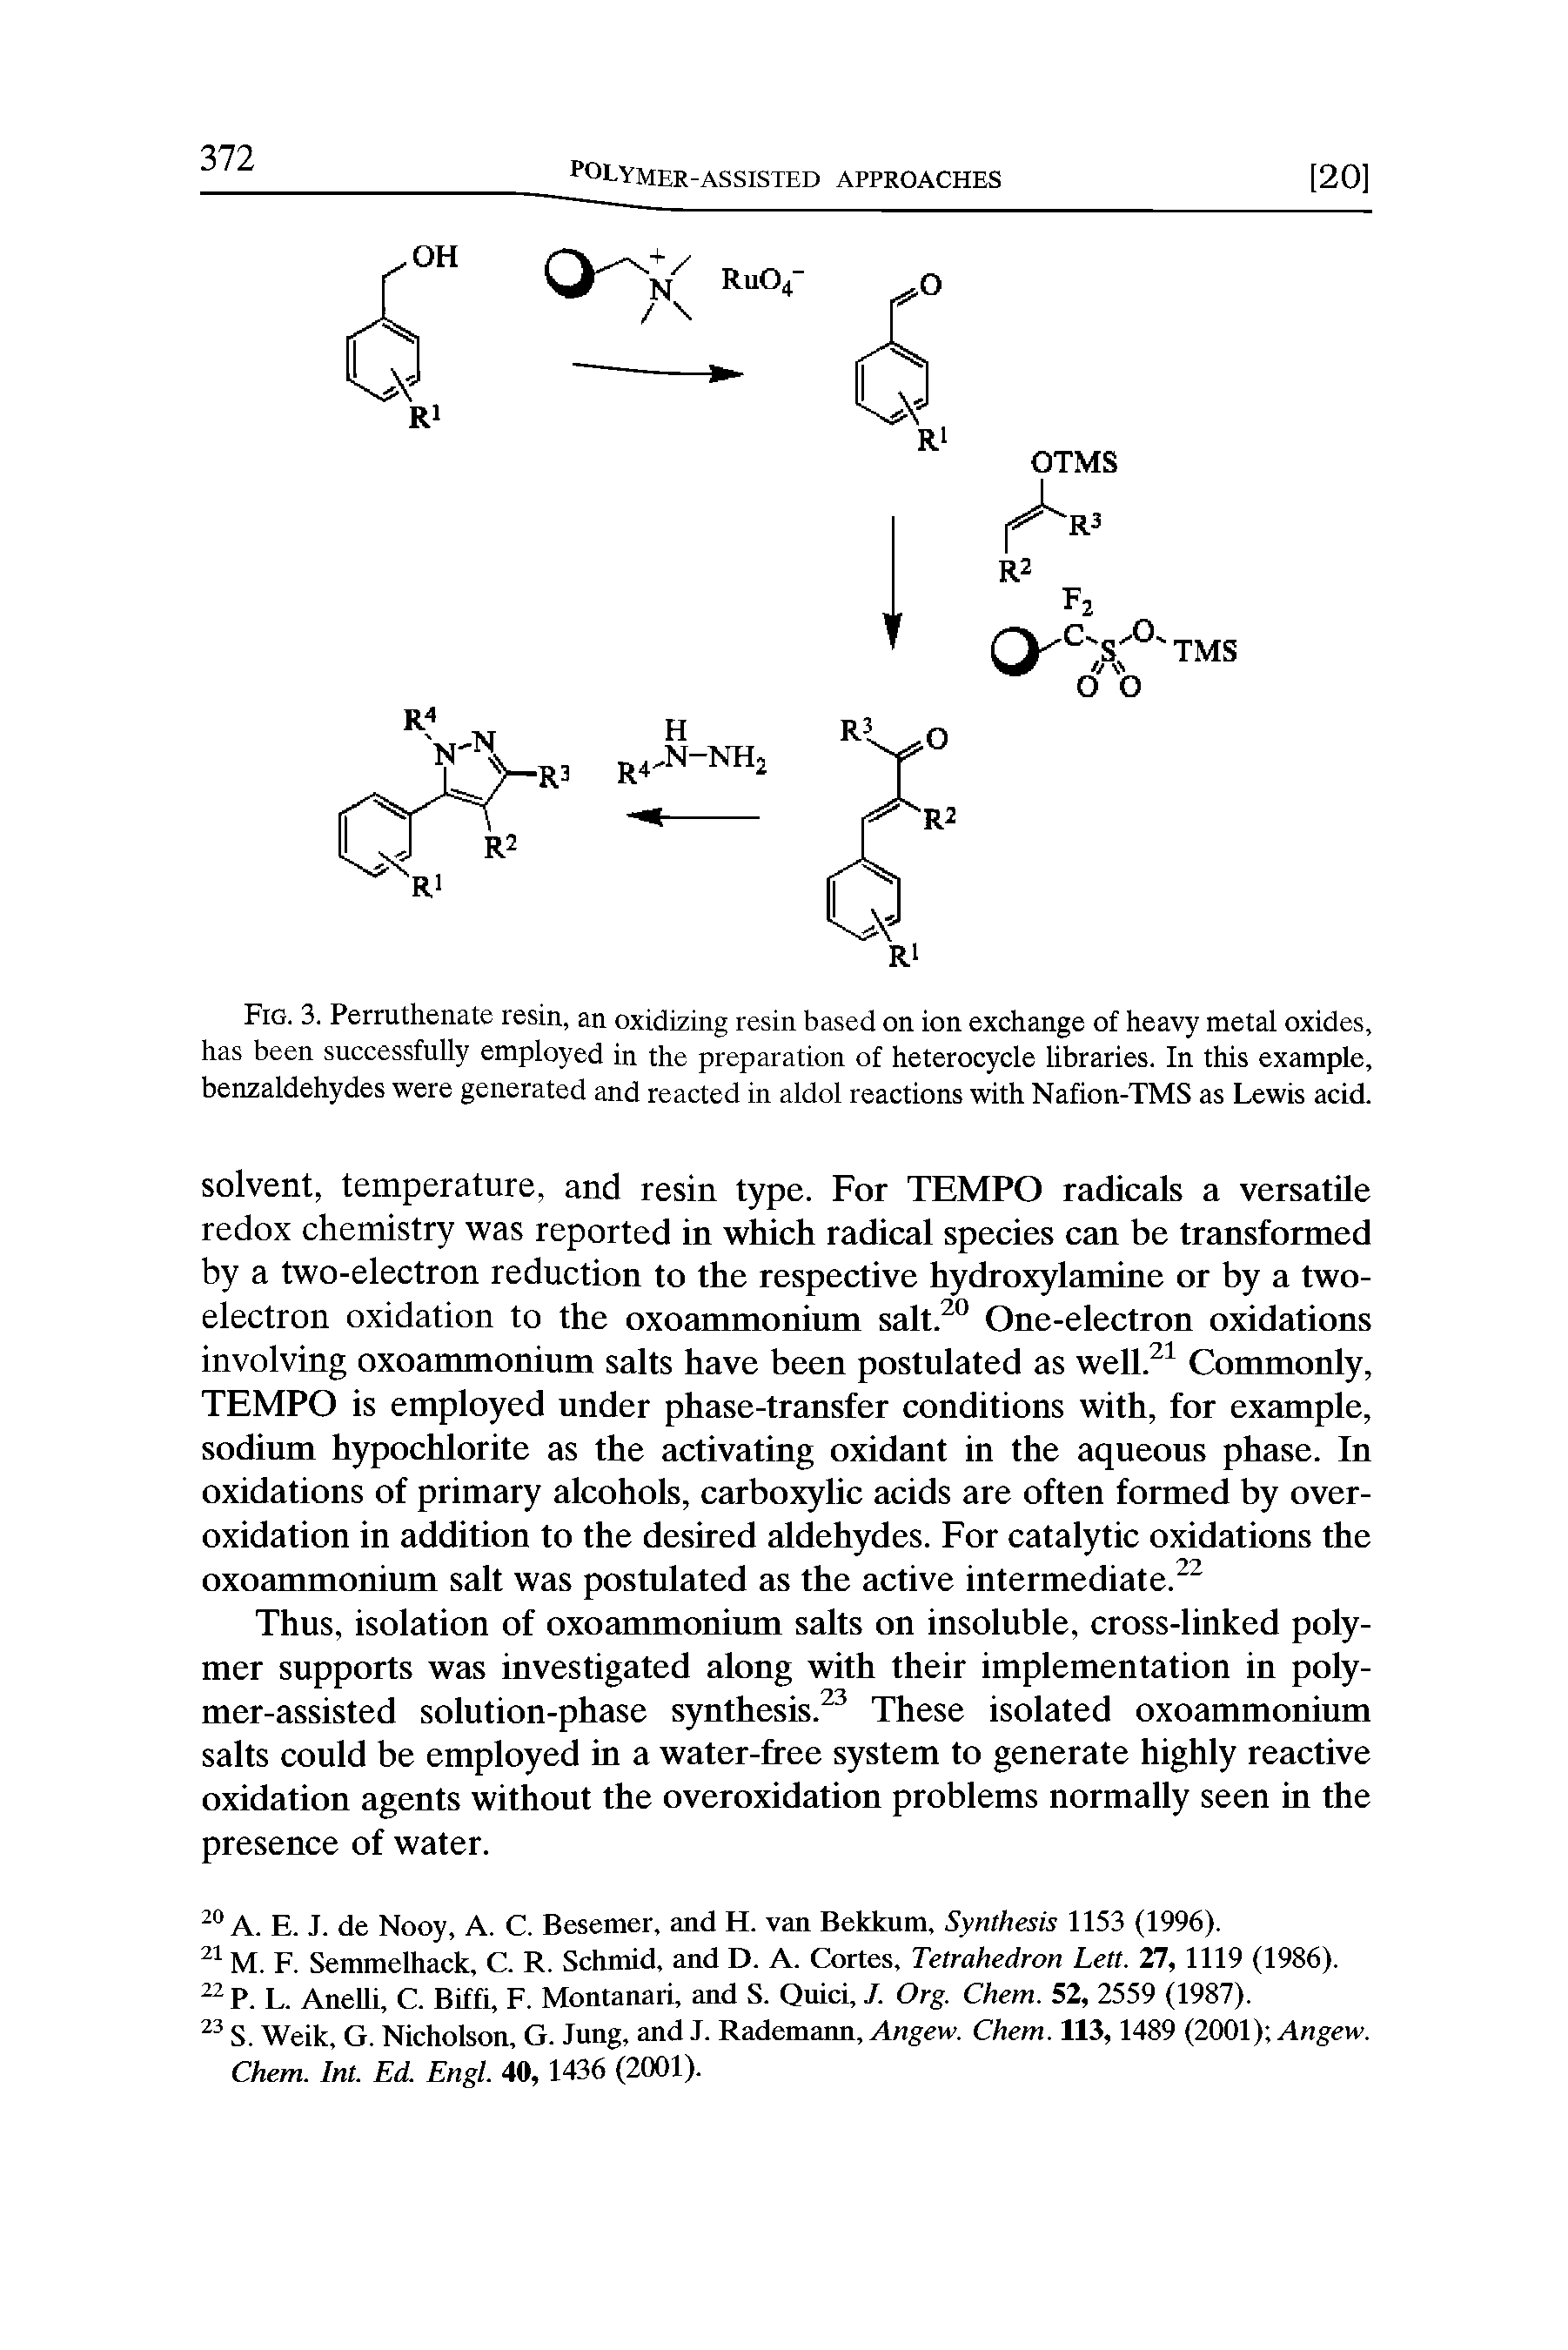 Fig. 3. Perruthenate resin, an oxidizing resin based on ion exchange of heavy metal oxides, has been successfully employed in the preparation of heterocycle libraries. In this example, benzaldehydes were generated and reacted in aldol reactions with Nafion-TMS as Lewis acid.